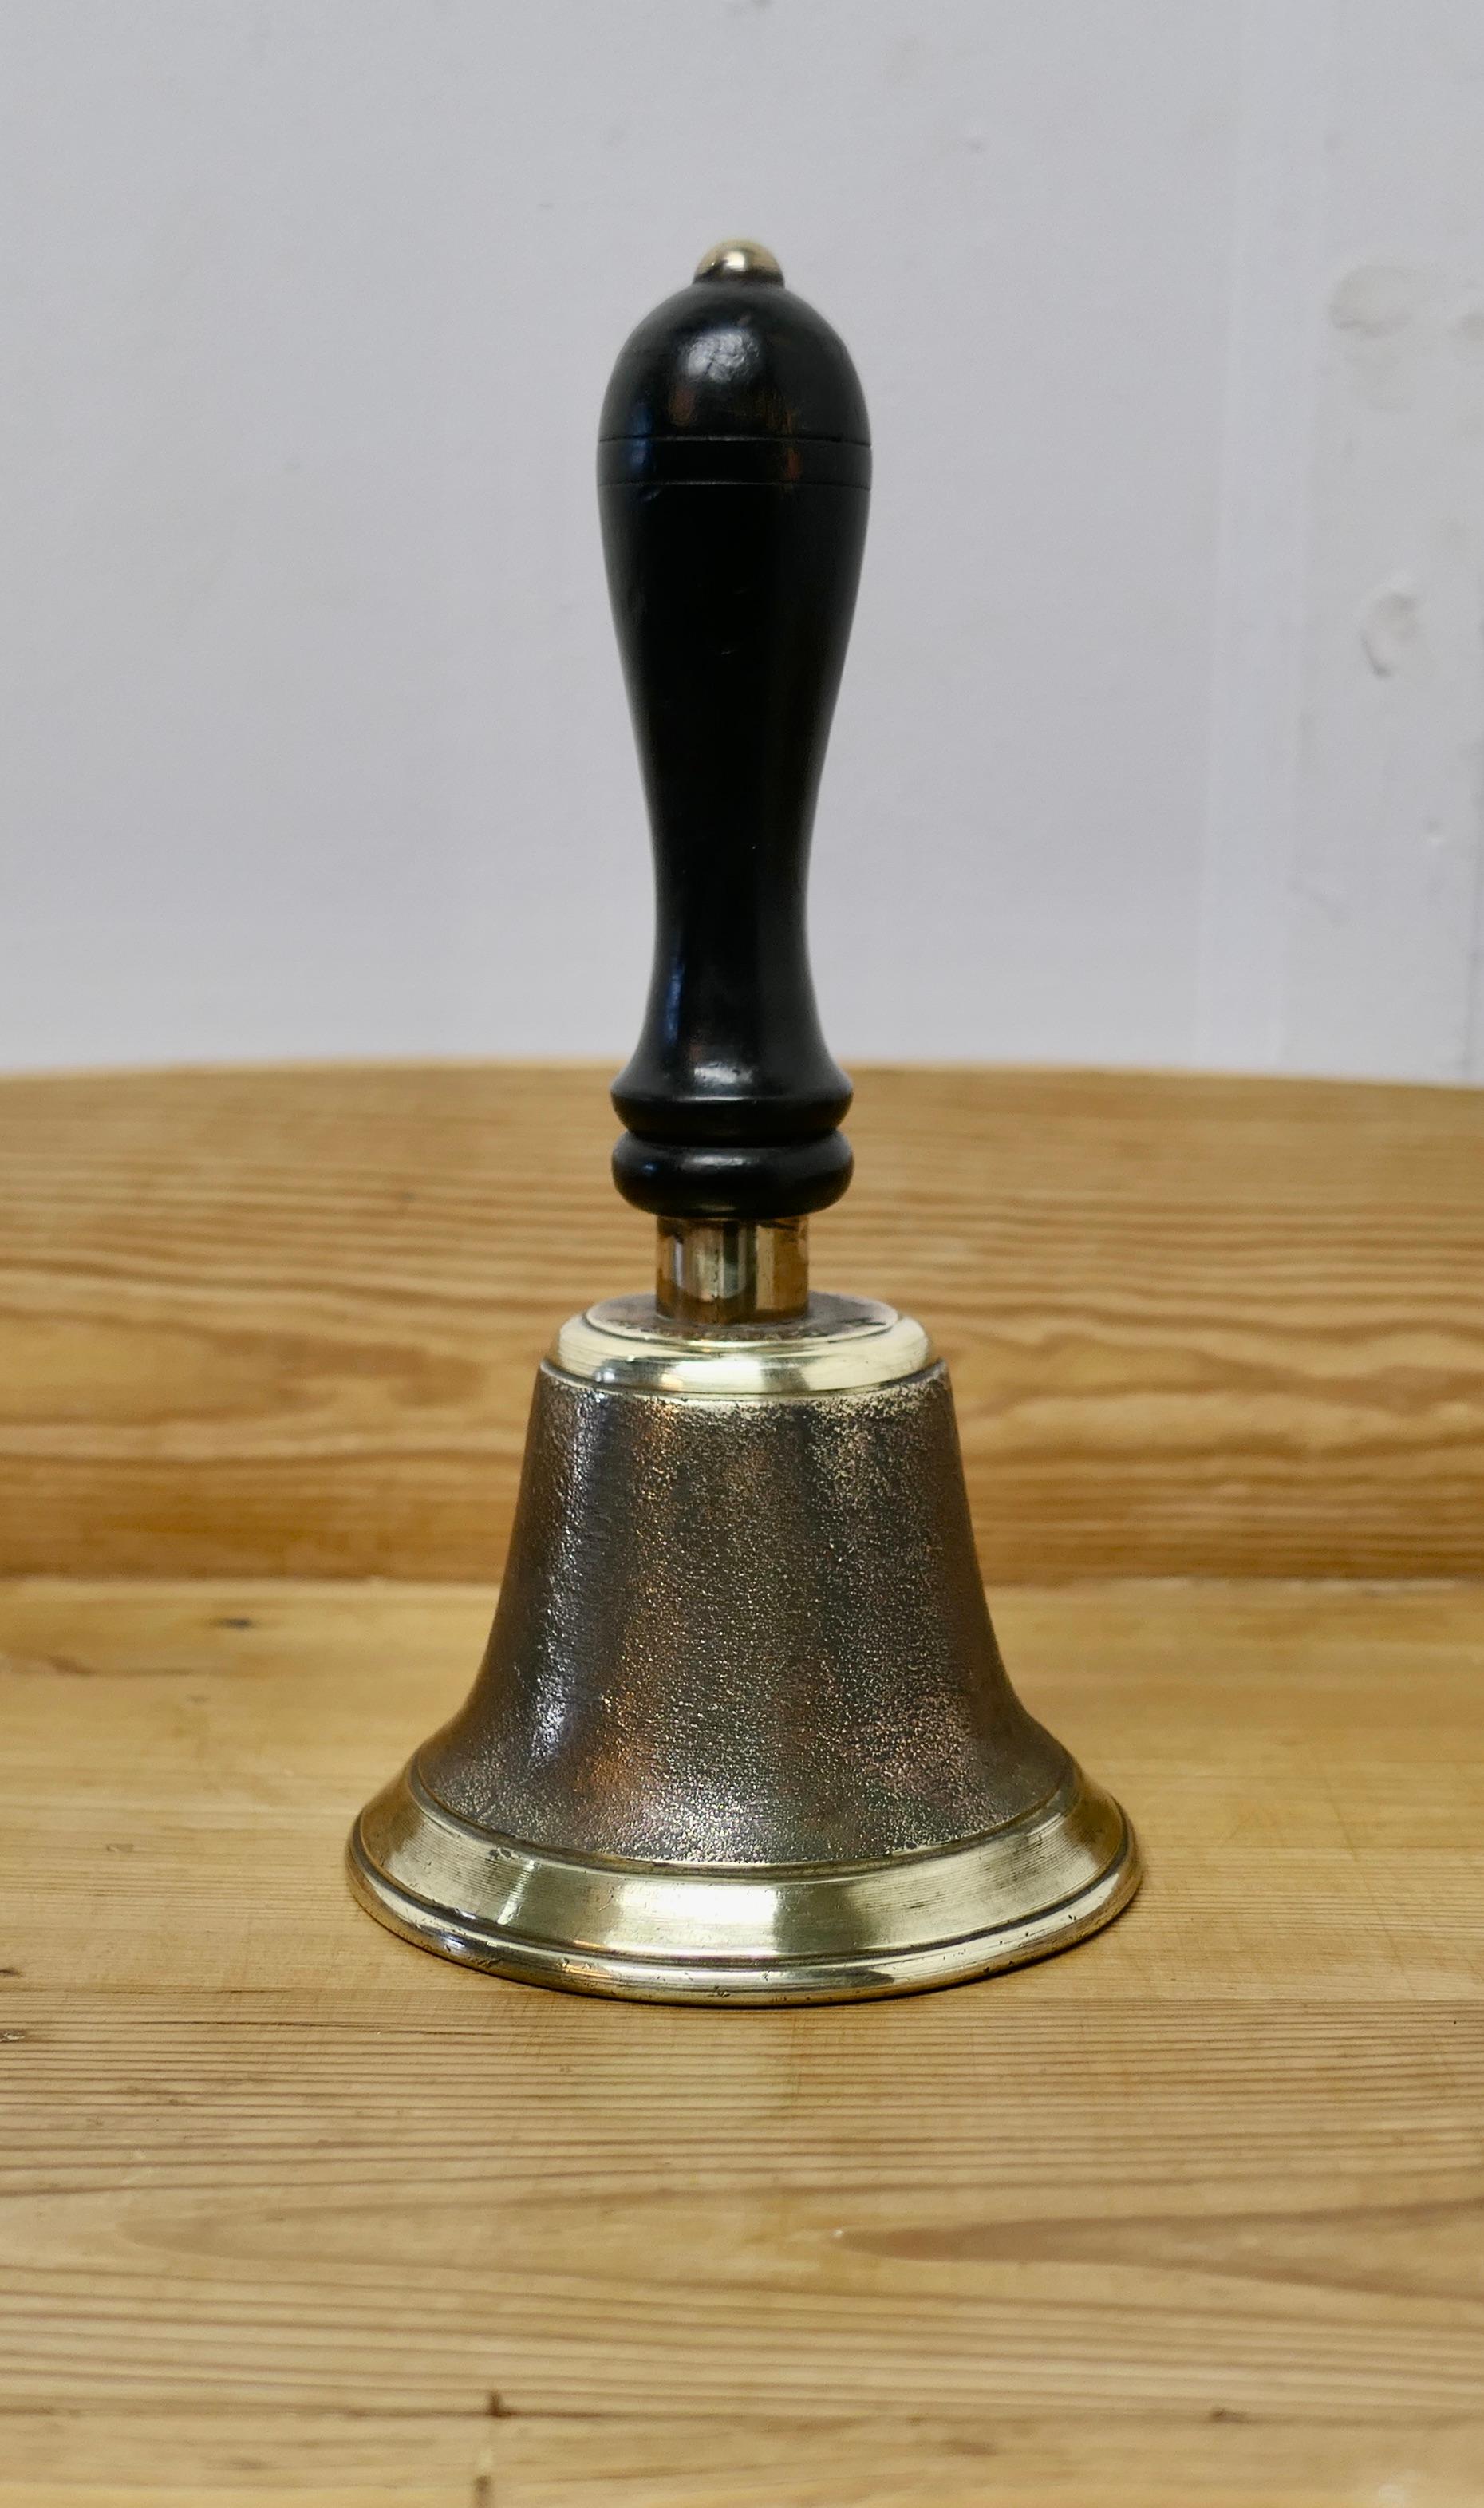 Old Brass British Military Issue Brass Handbell

A Great Piece, Second World War, dated 1942, marked A.S.1942, and with the broad arrow insignia denoting British military issue, with a turned black handle
The bell is 10” high, and 6” in